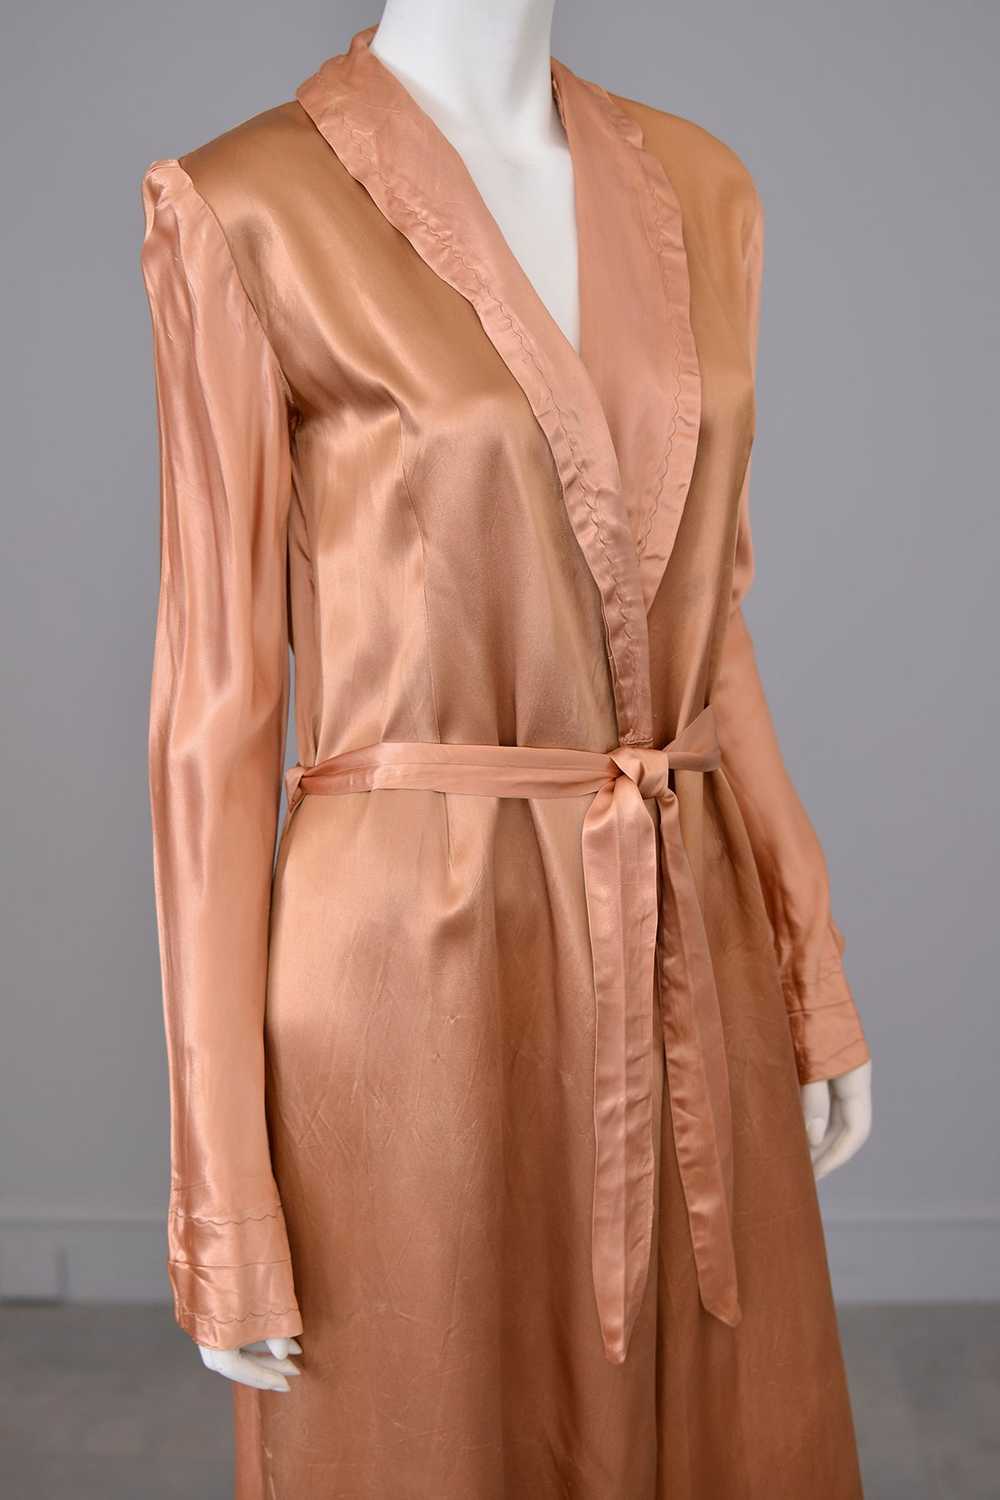 1940s Copper Satin Lounging Robe - image 7